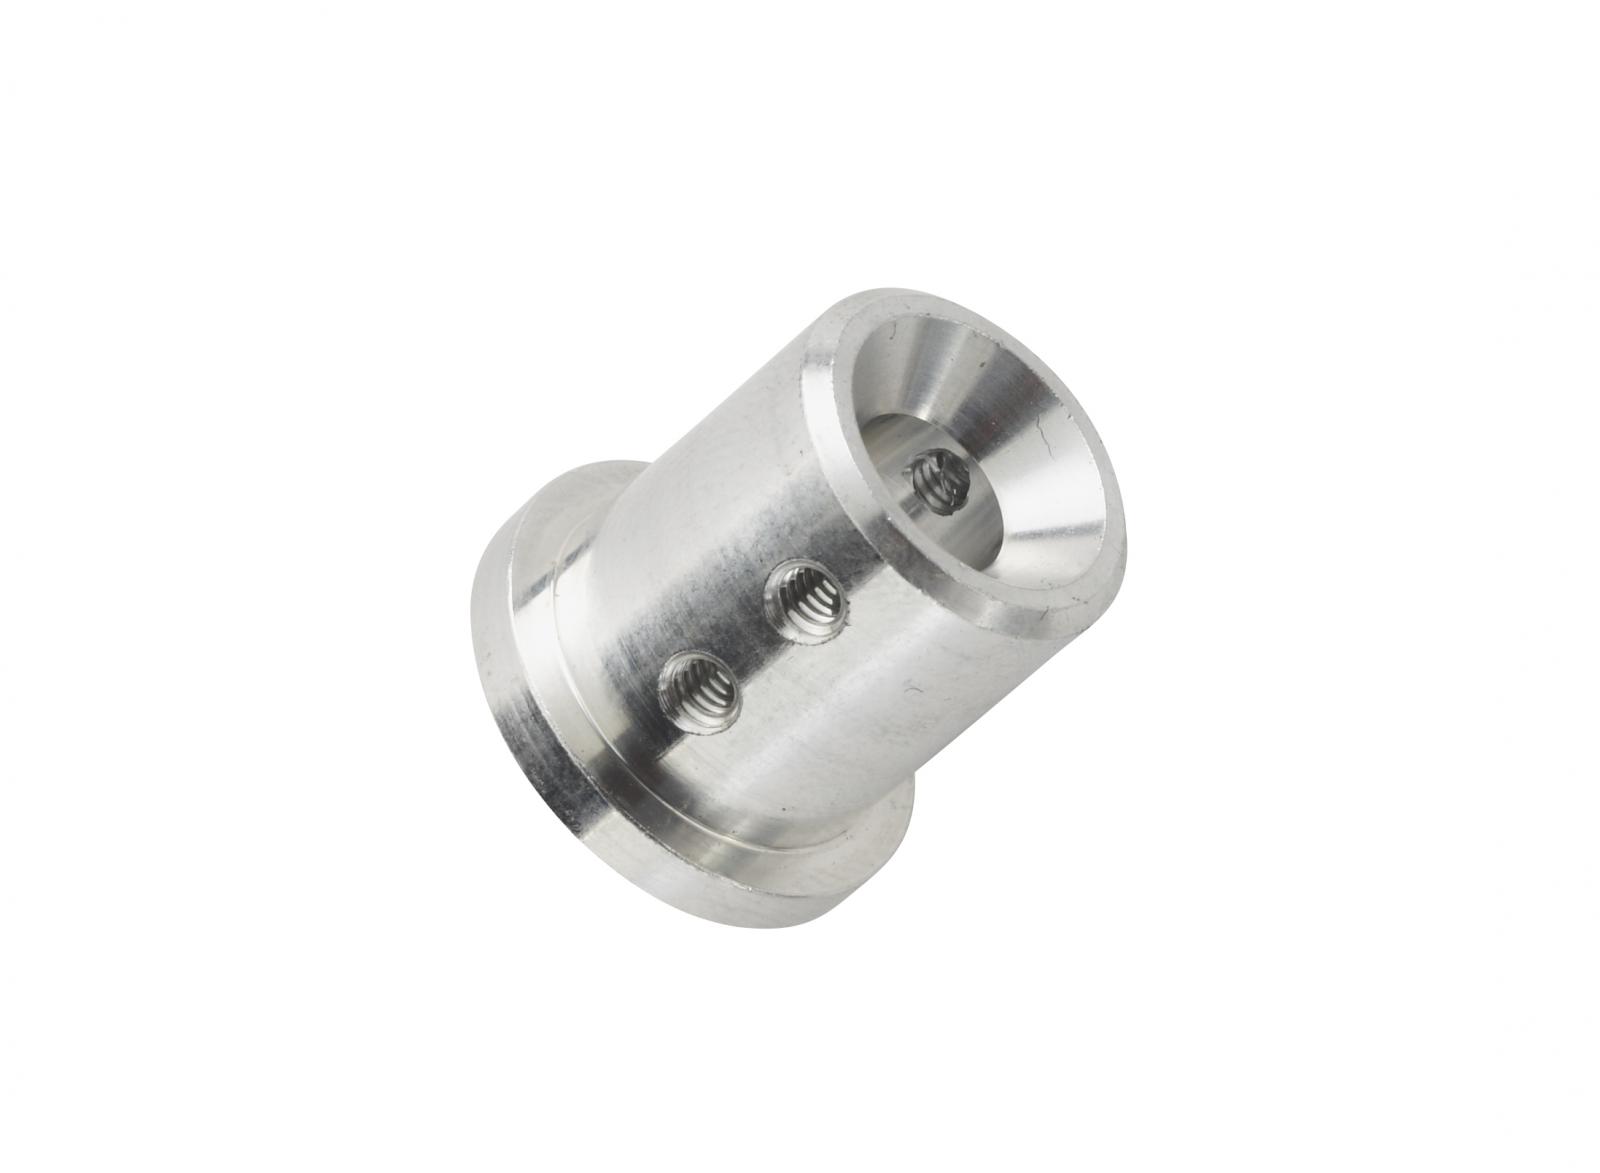 TapeTech® Pusher Cap. Part number 140017